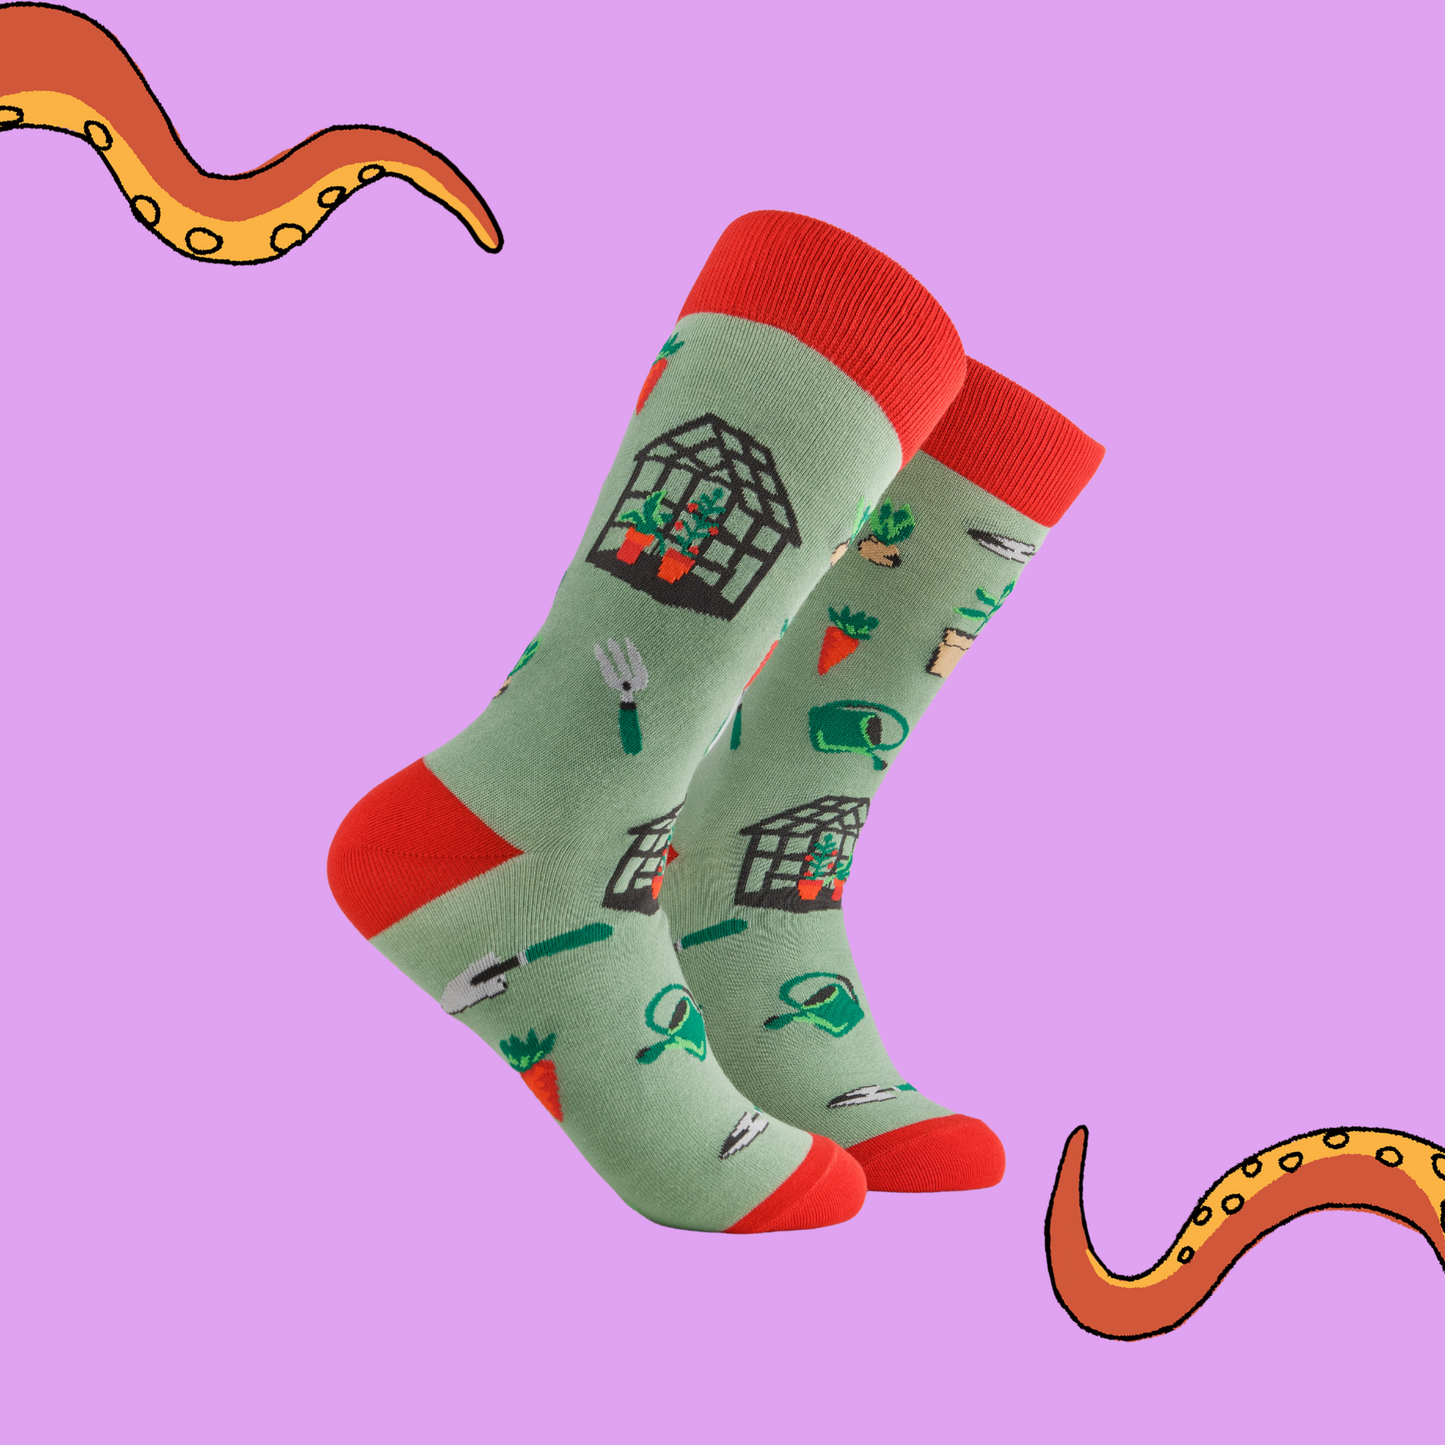 A pair of socks depicting garden tools and greenhouses. Green legs, red cuff, heel and toe.